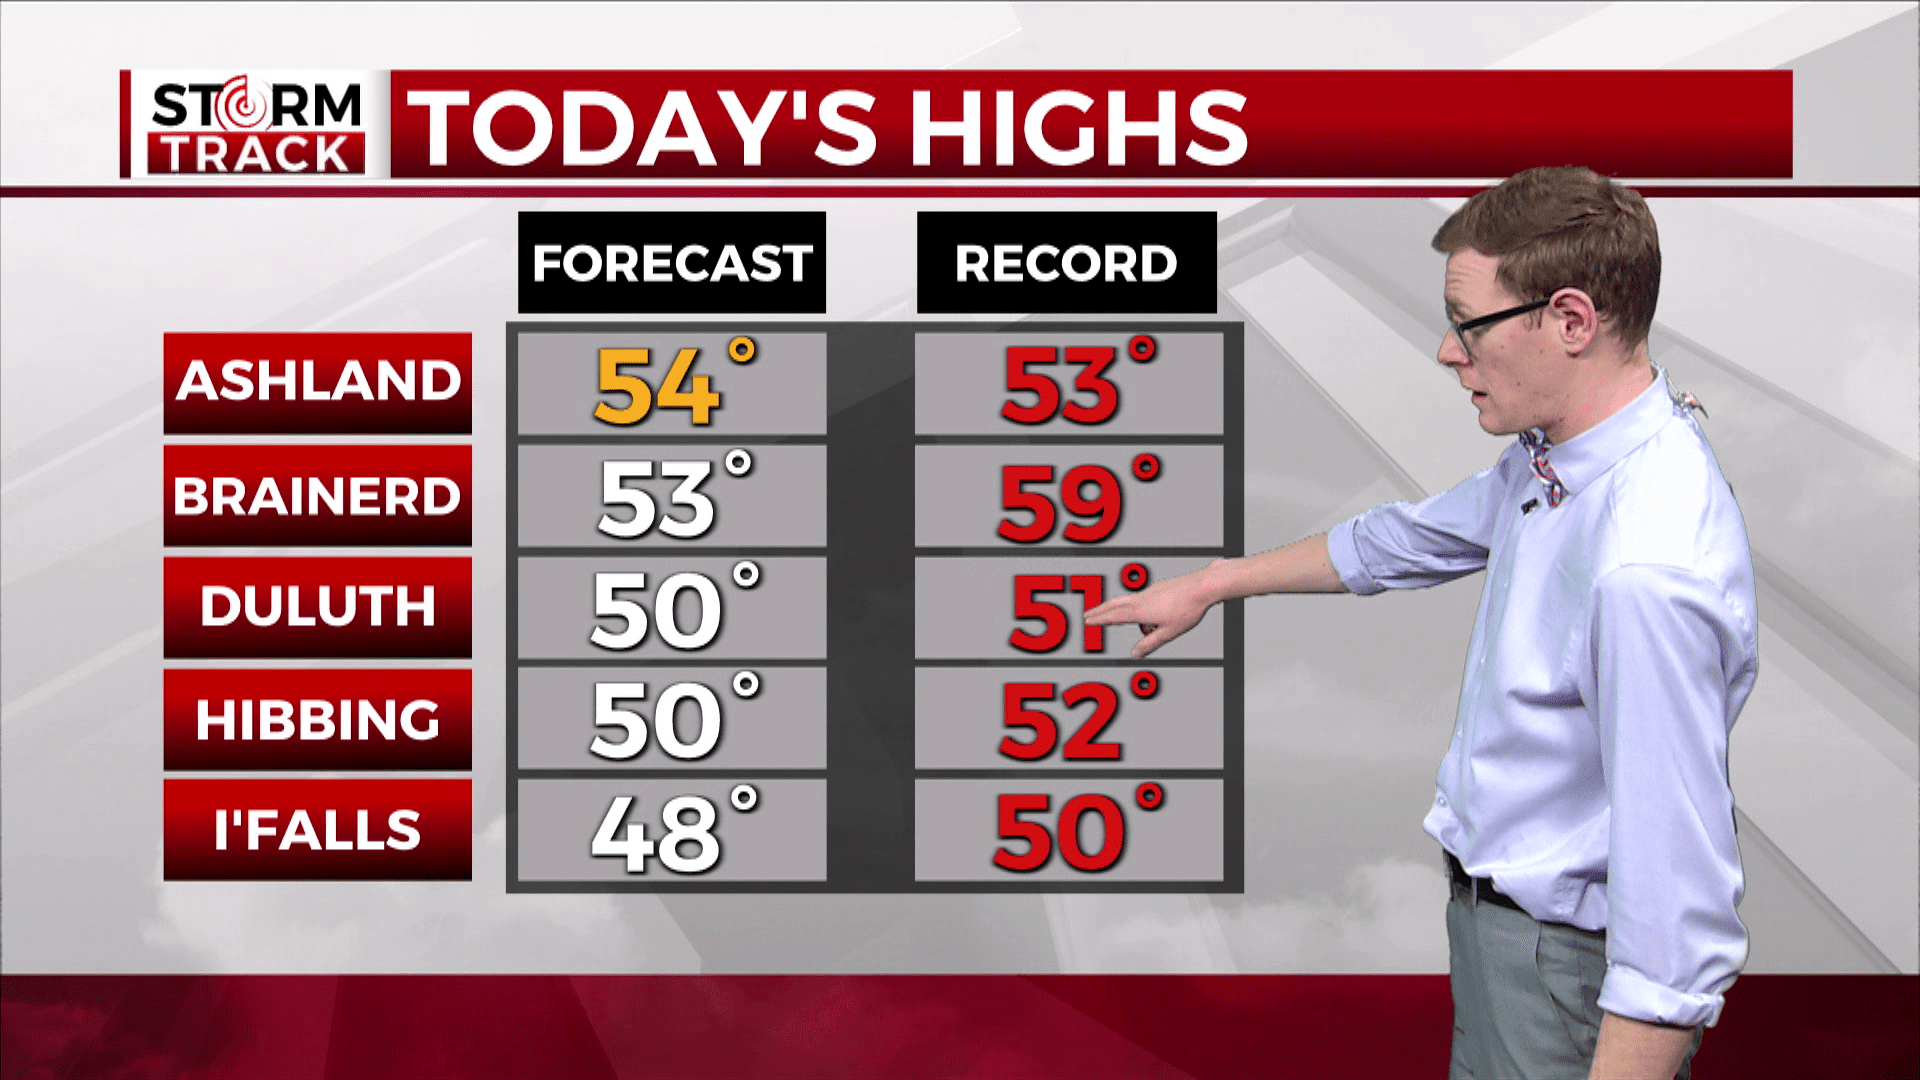 Brandon showing Friday's forecast highs compared to records